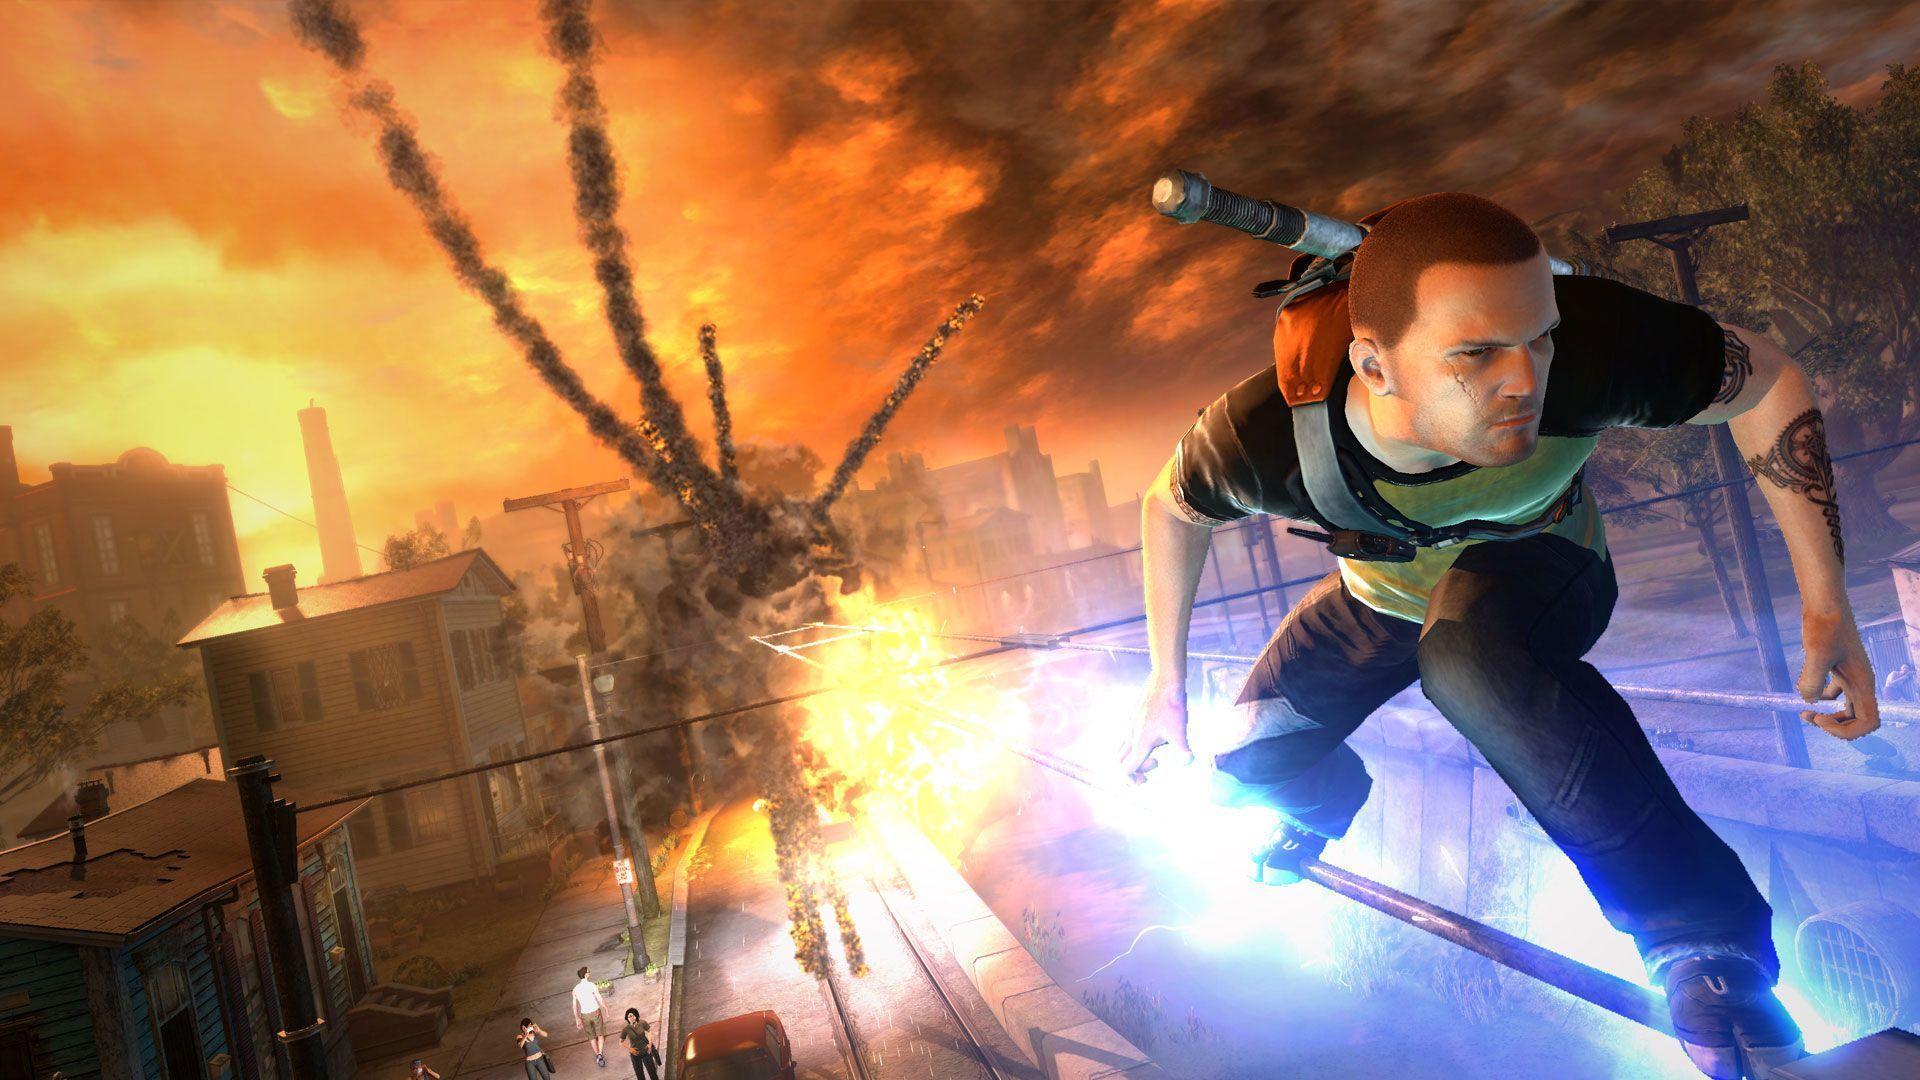 Download InFamous 2 Game Wallpaper (5754) Full Size. Game